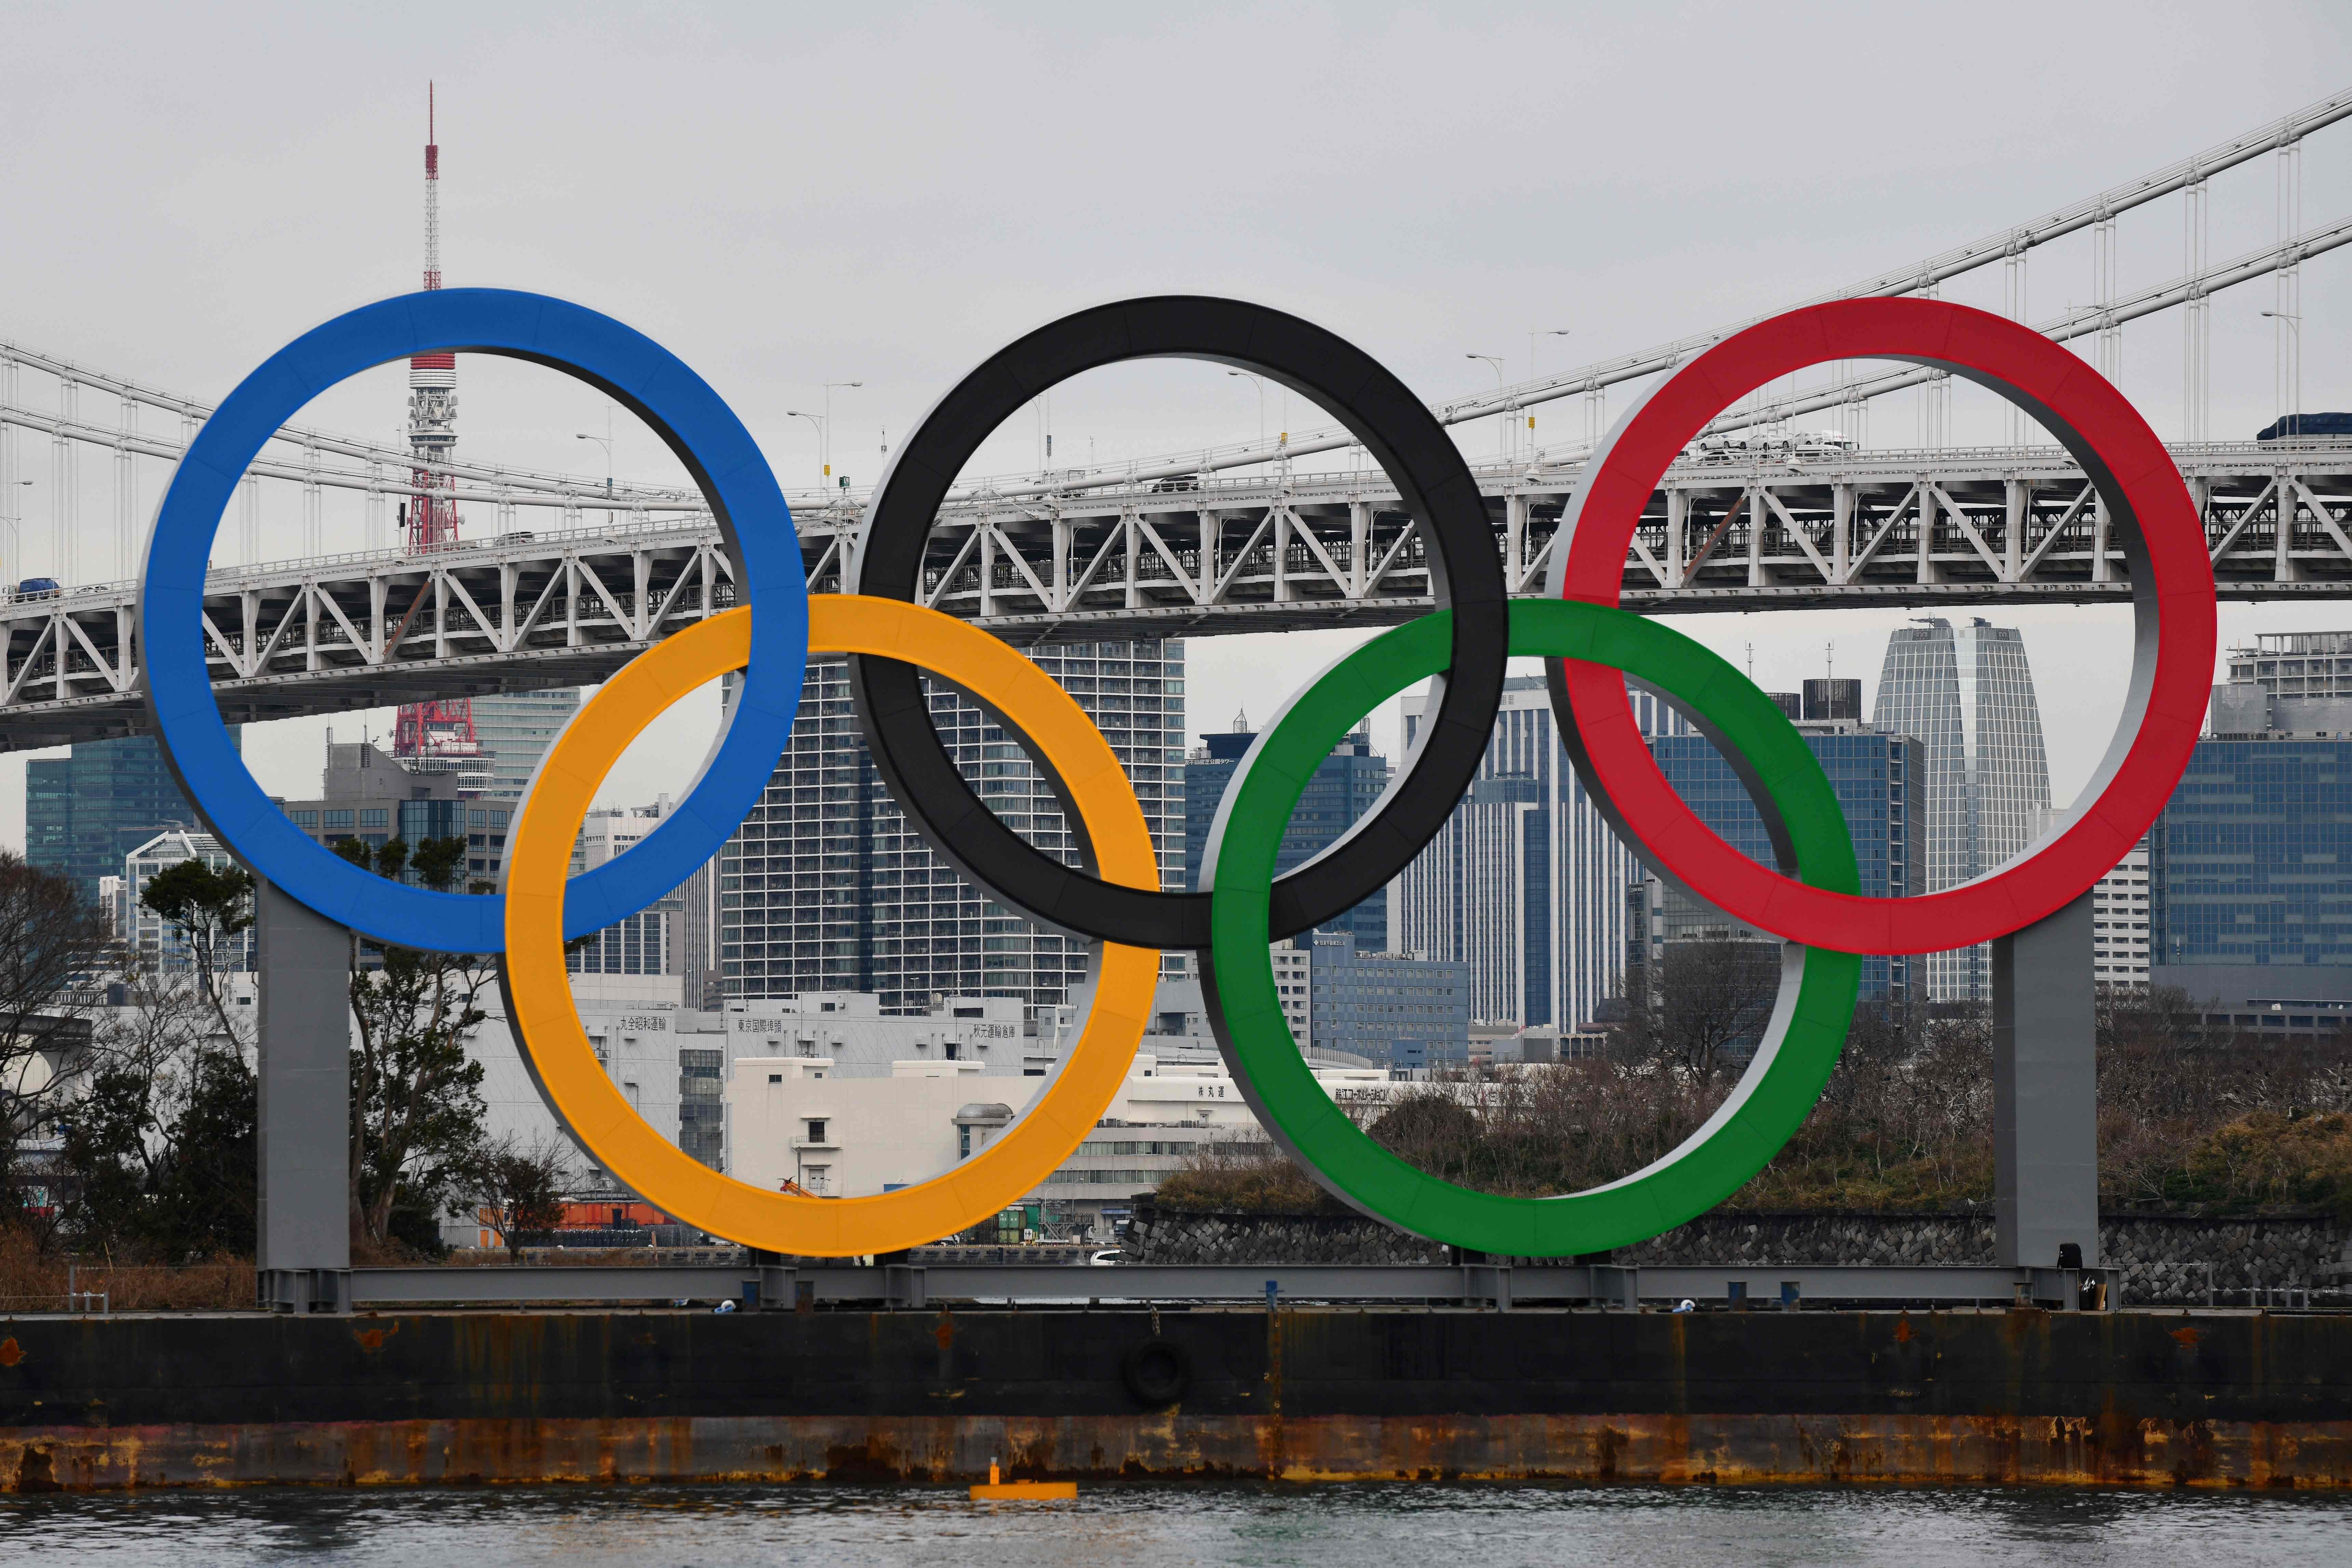 Japan is officially spending $15.4 billion to run the Olympics, though government audits suggest the figure is much higher. Credit: AFP Photo